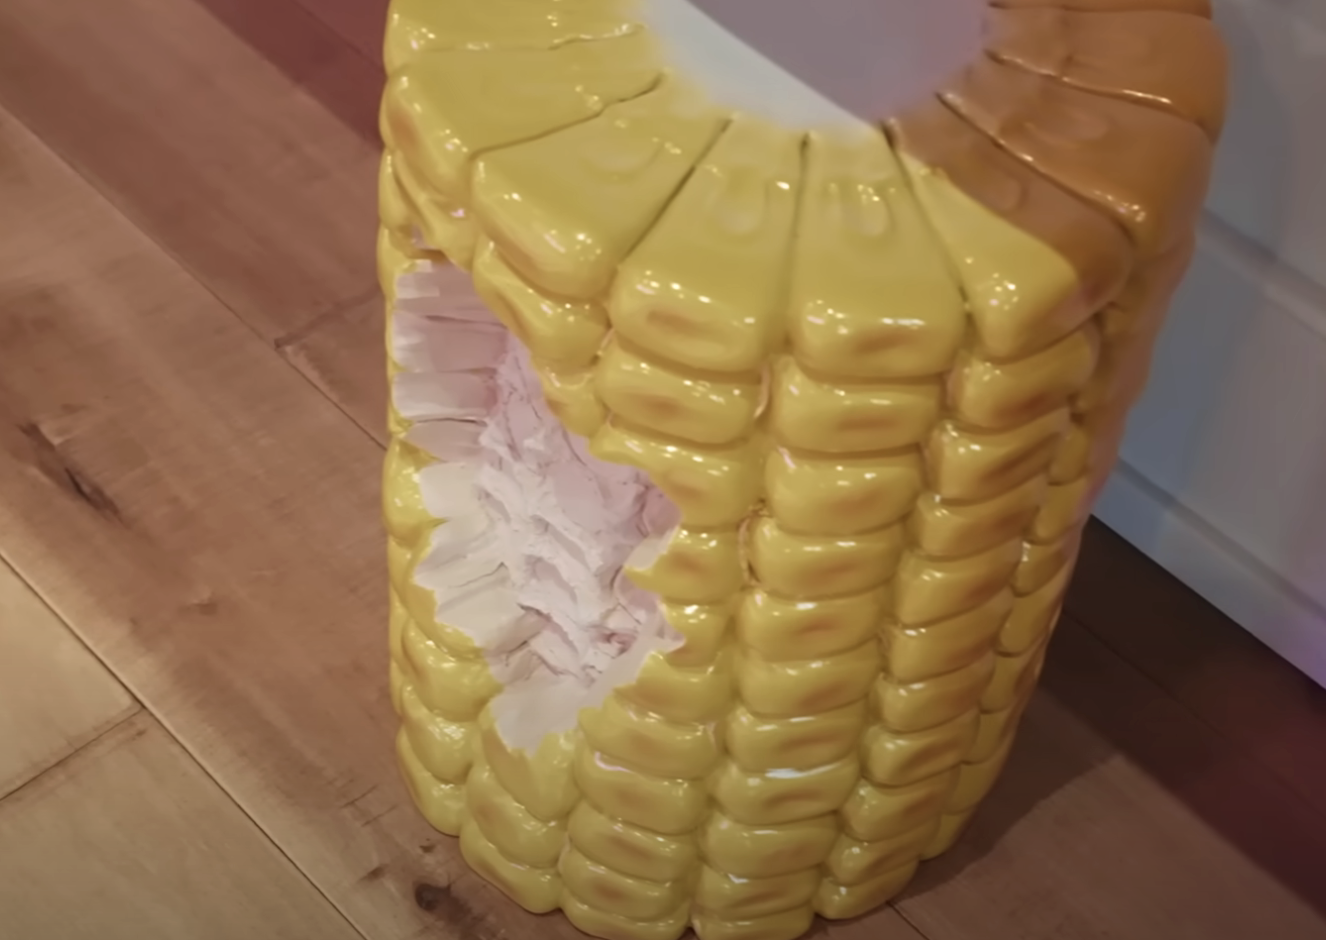 Stool or table that looks like corn-on-the-cob